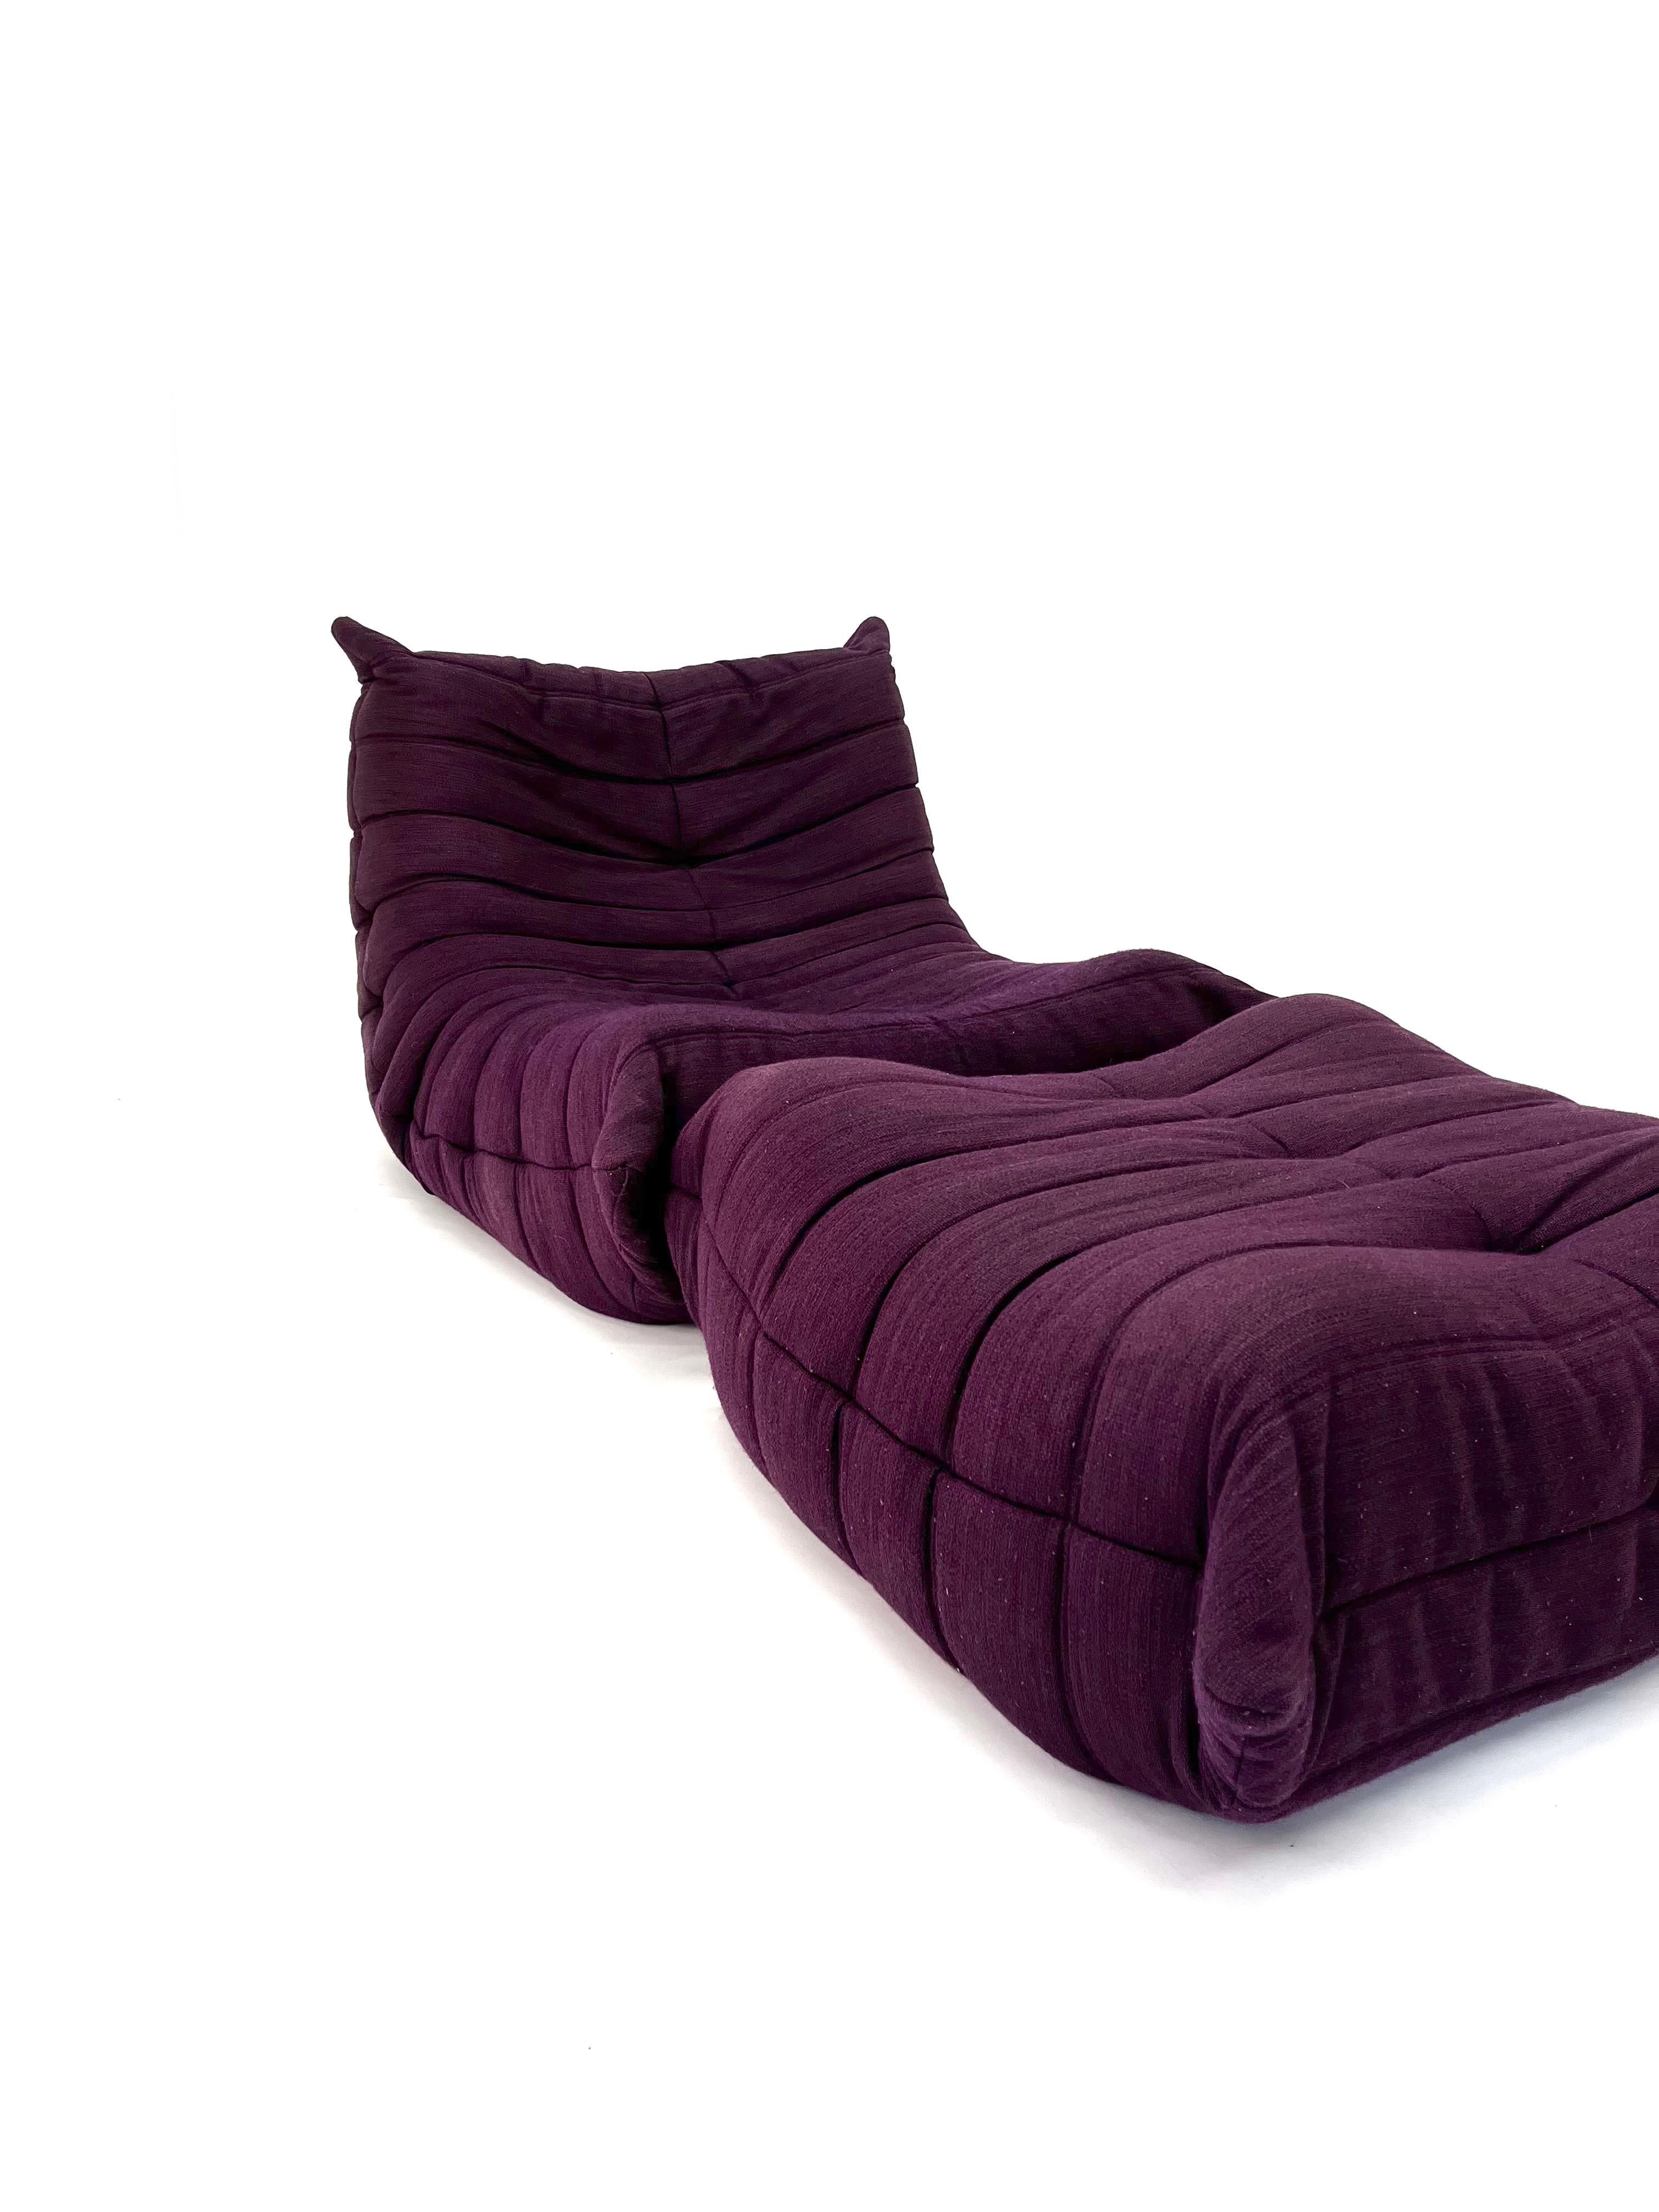 Togo Chair and Ottoman in Purple by Michel Ducaroy for Ligne Roset For Sale 3